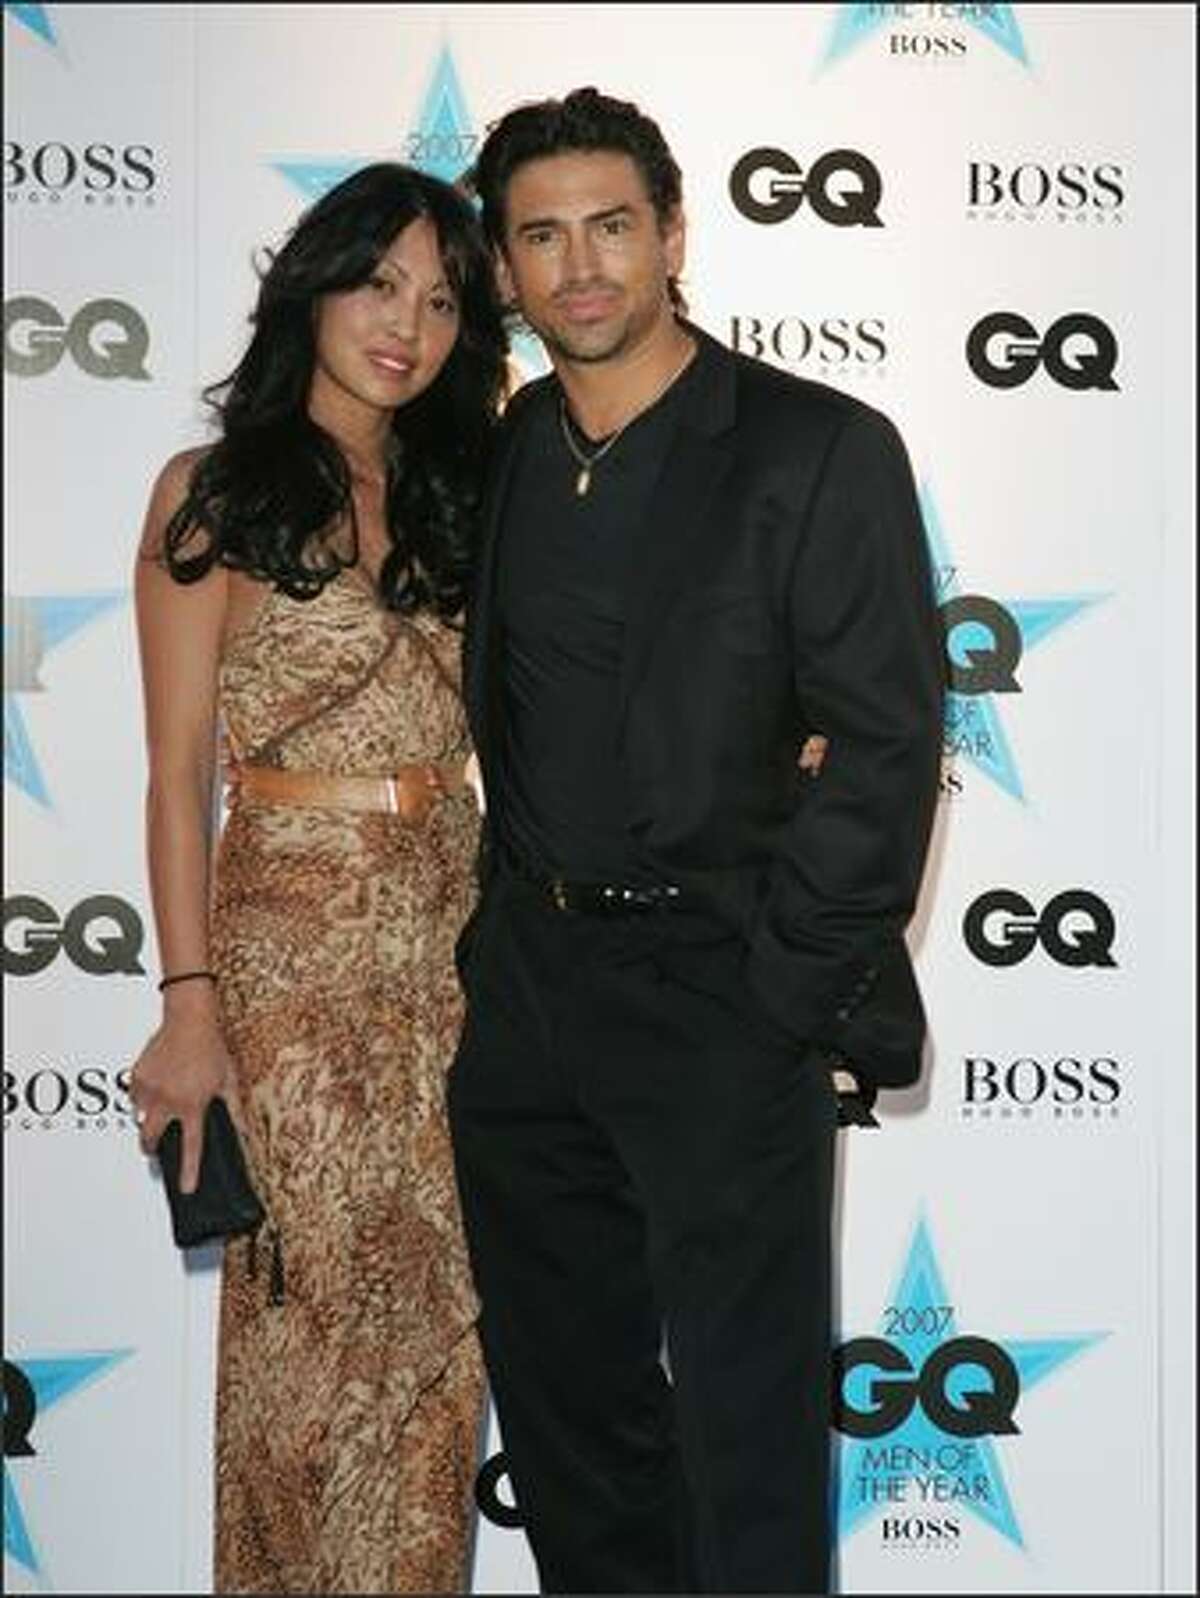 Cherri Tione and Justin Melvey attend the GQ Men of the Year Awards at Fox Studios on Tuesday in Sydney, Australia.